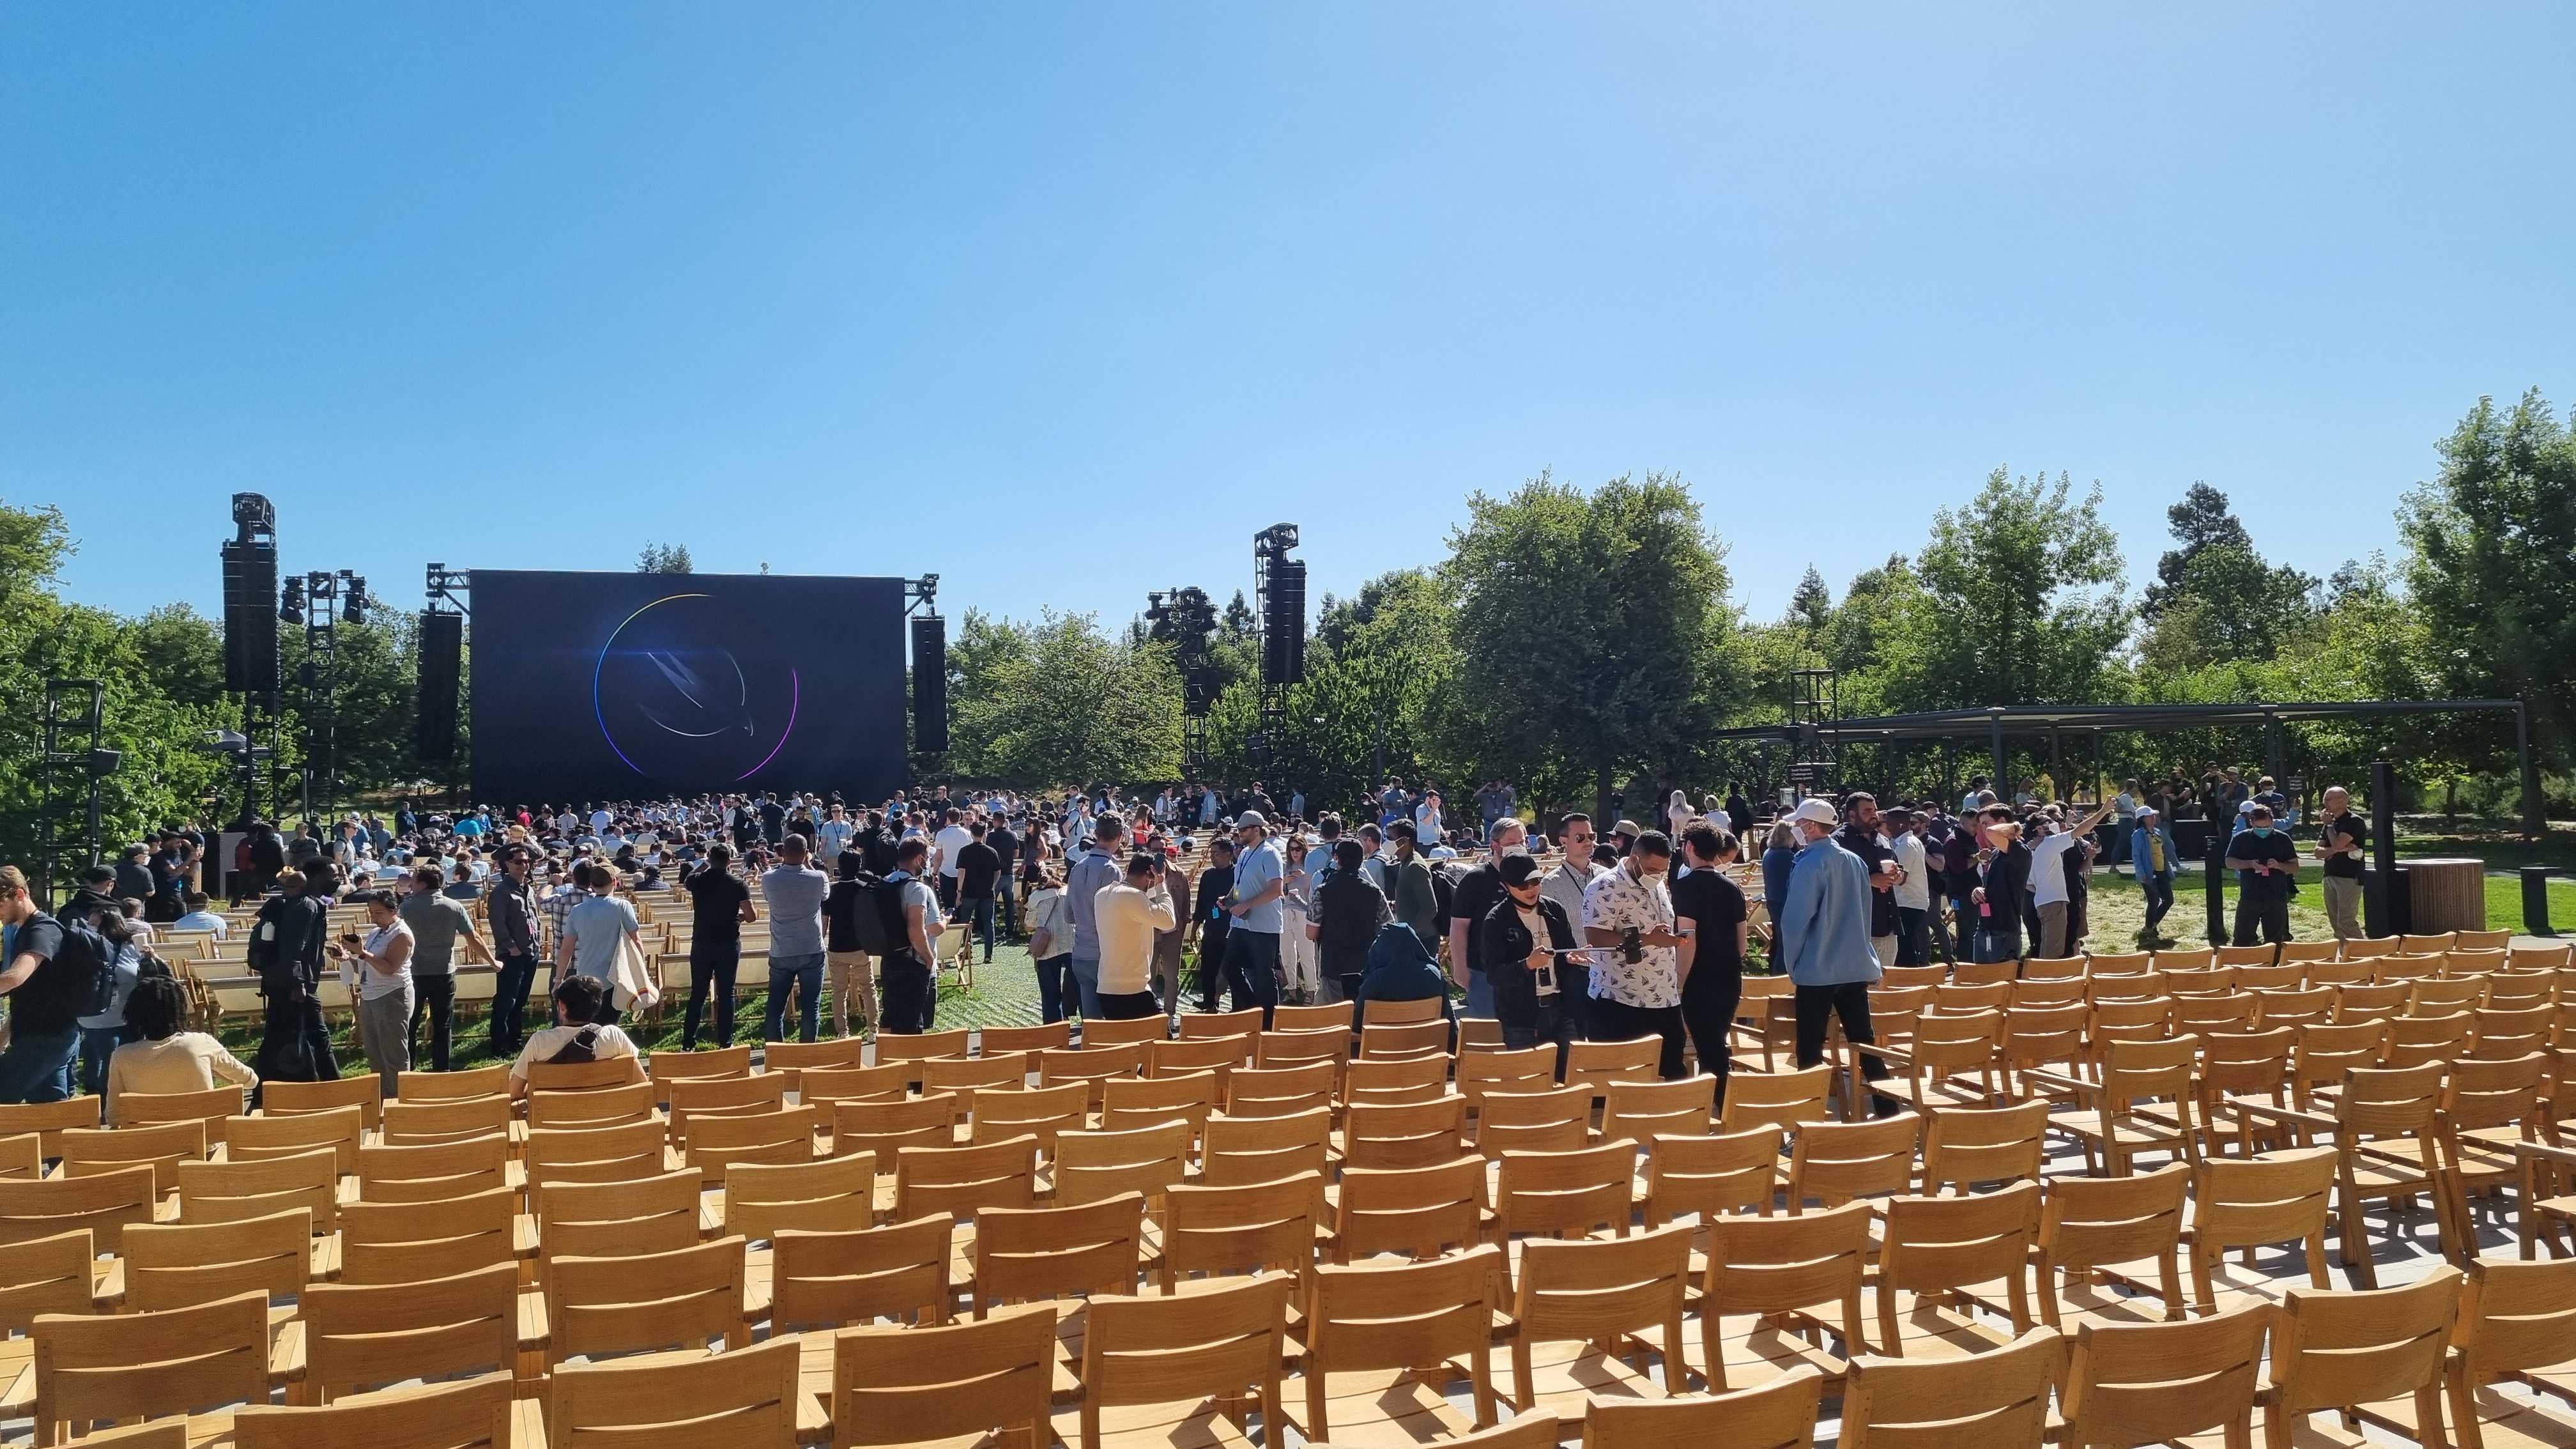 The Apple Campus during WWDC 2022